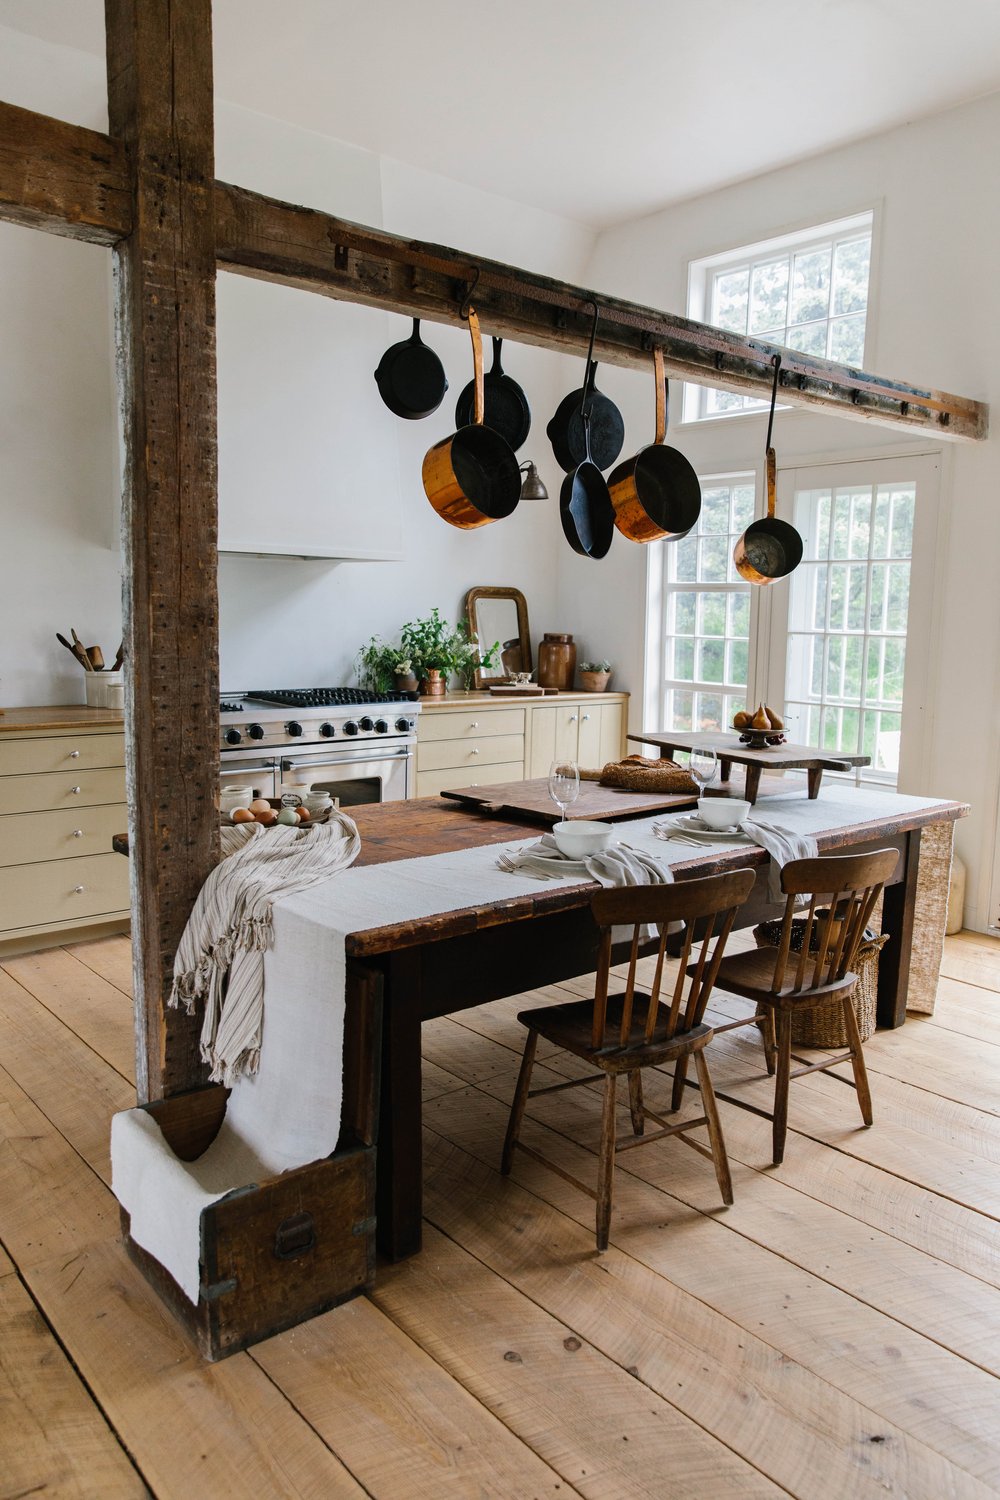 pots and pans hang above the central kitchen island/table. photography by erin  10